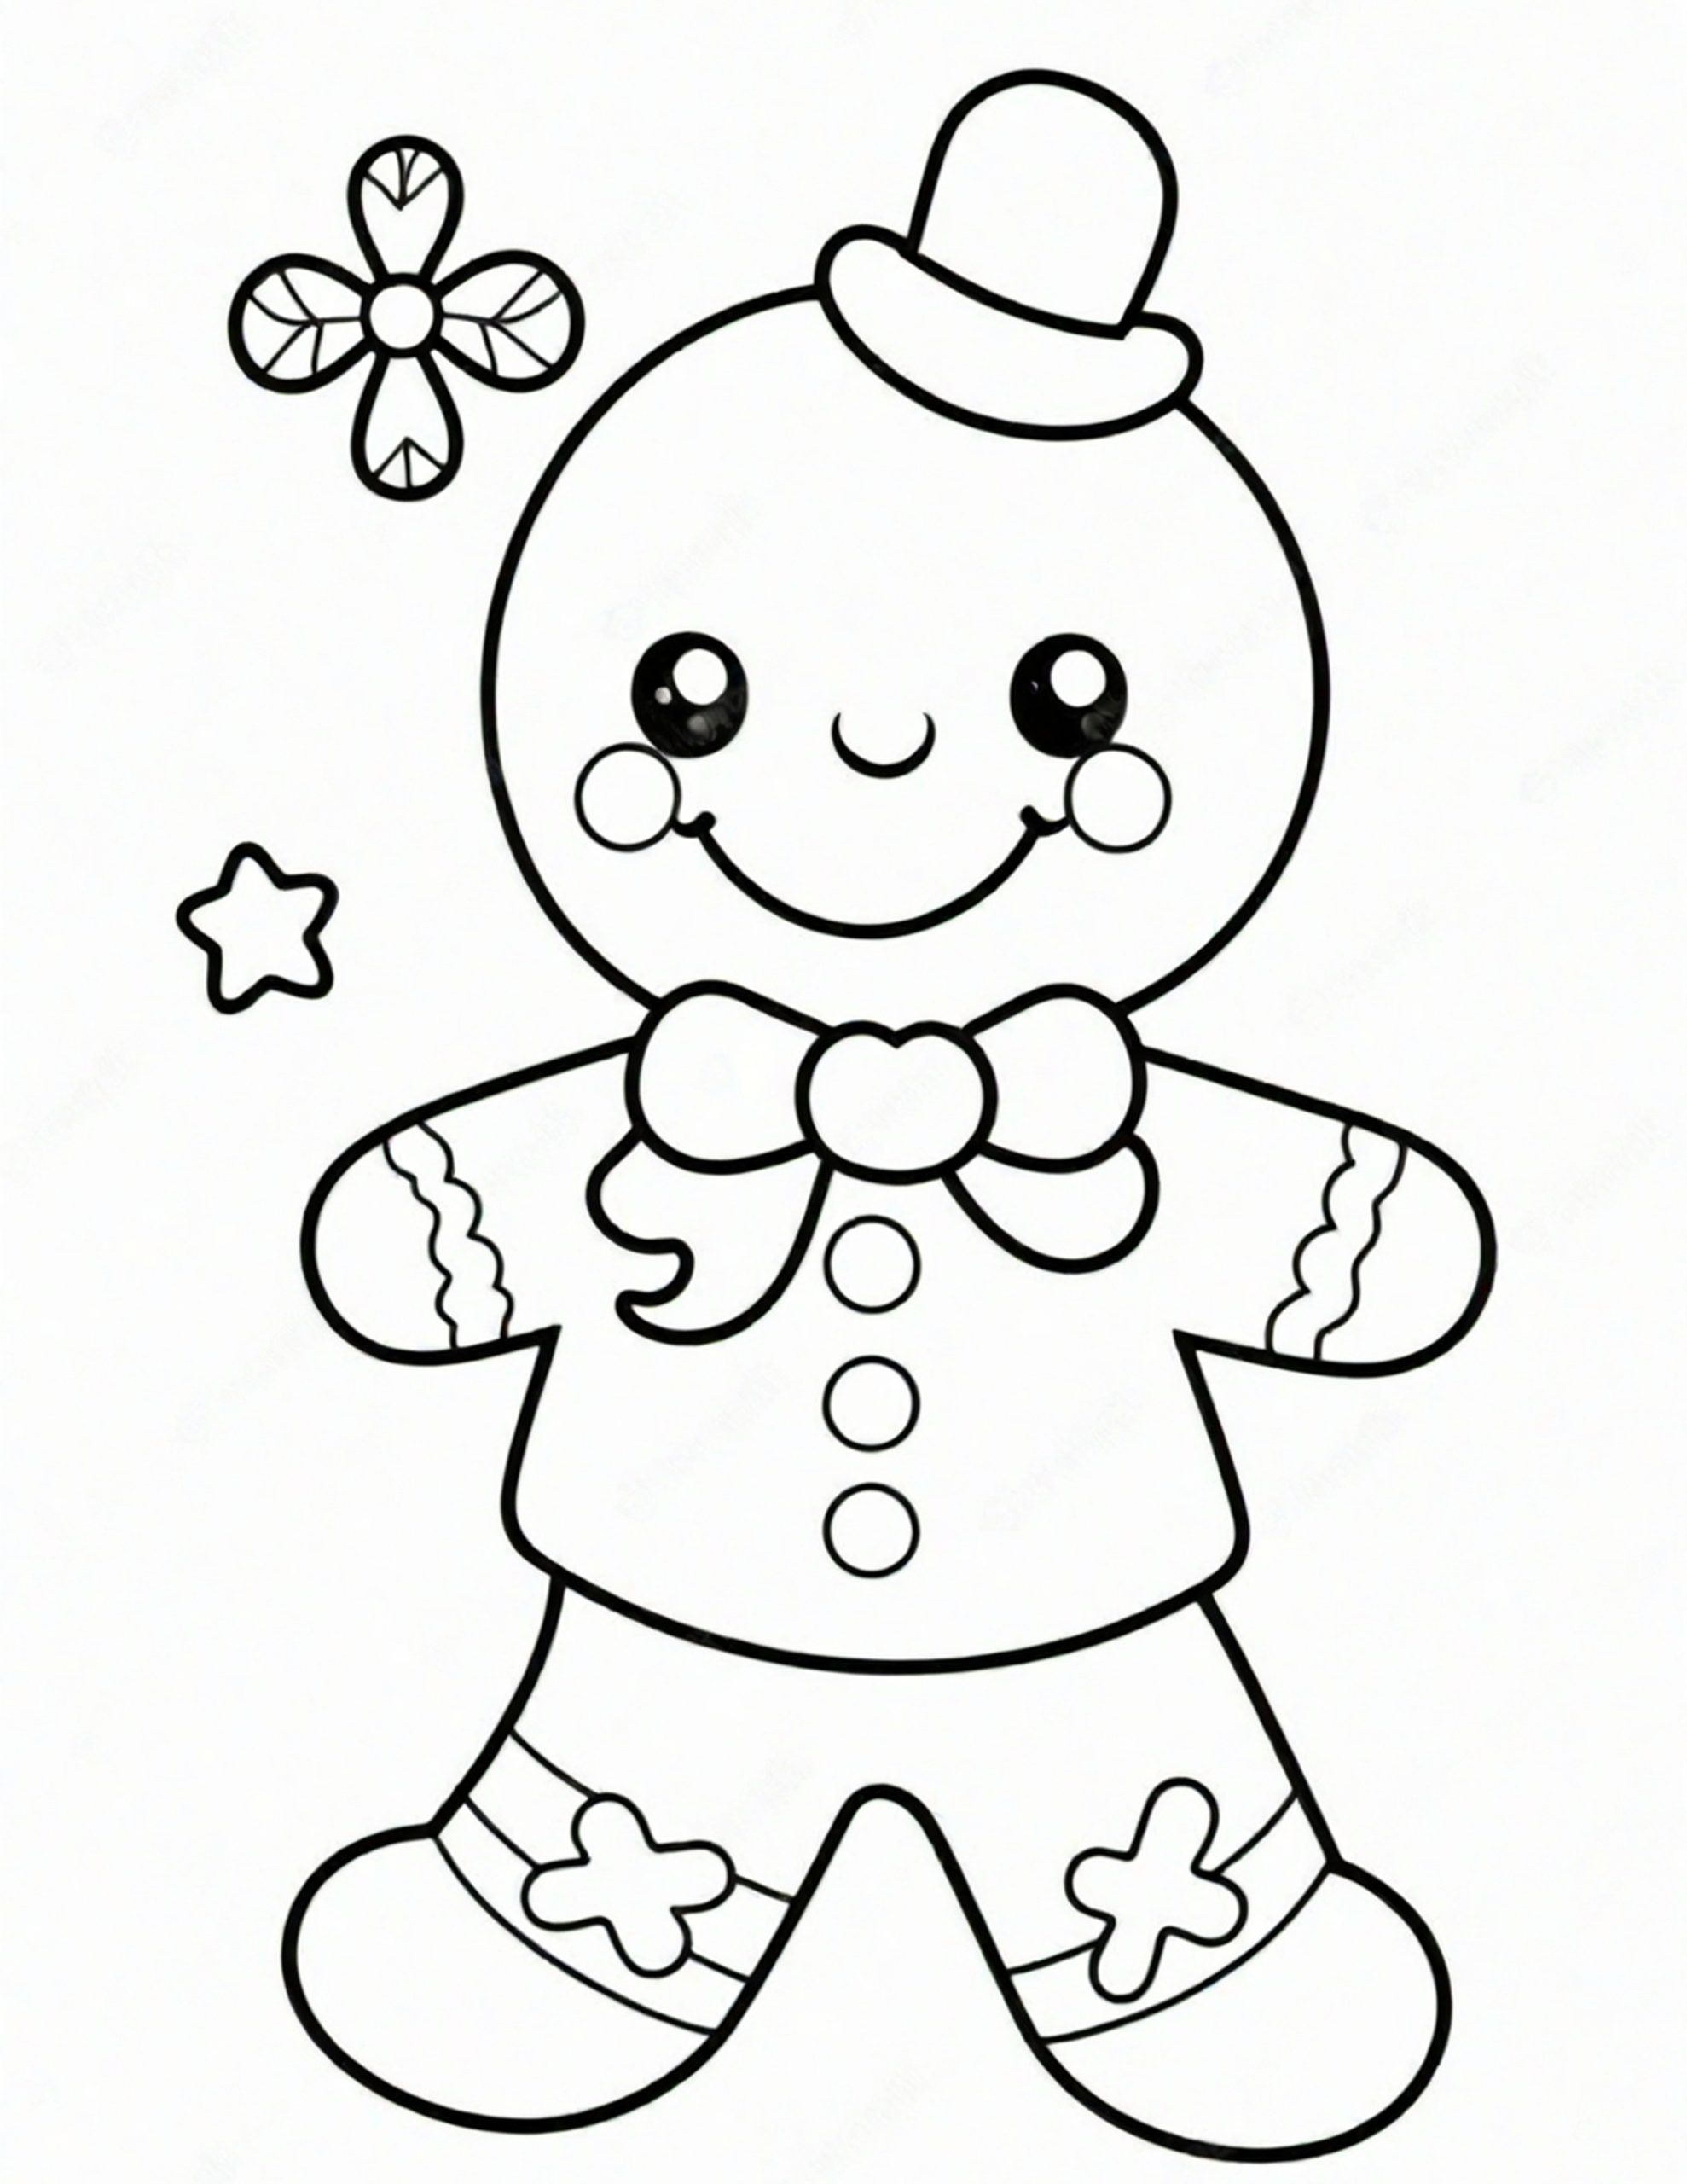 Gingerbread man coloring pages skip to my lou